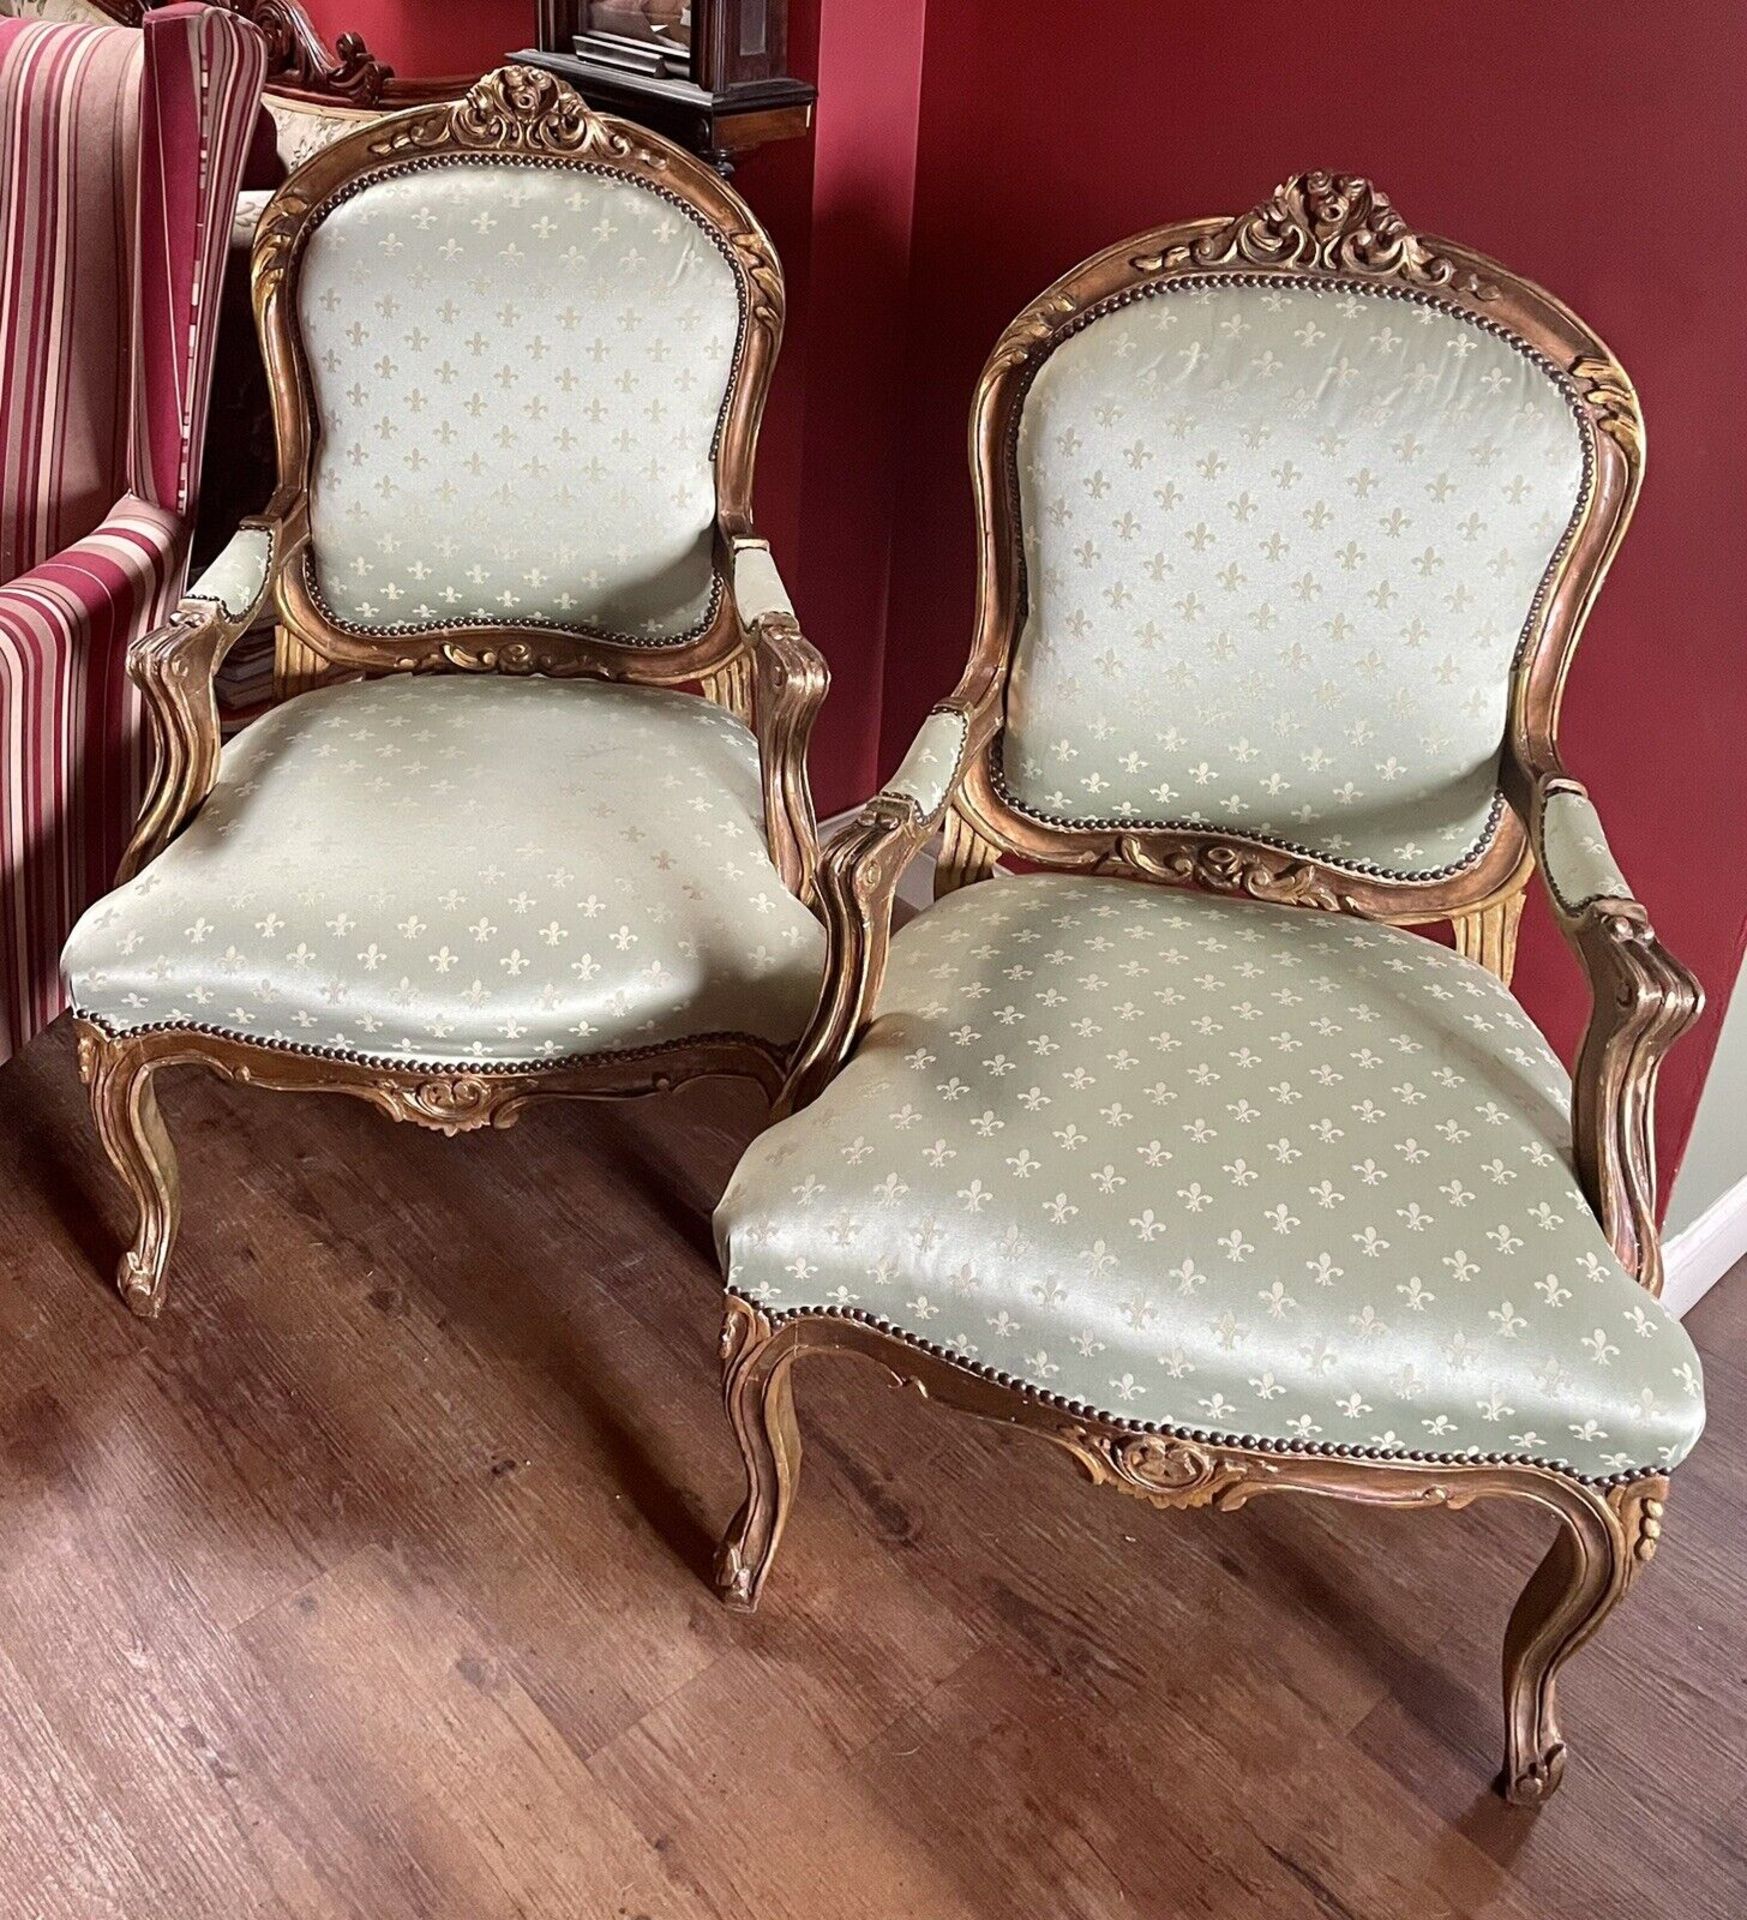 A Pair of Fauteuils In Louis XVI Style Carved Gilt Wood Arm Chairs Upholstered In Fleur De Lys